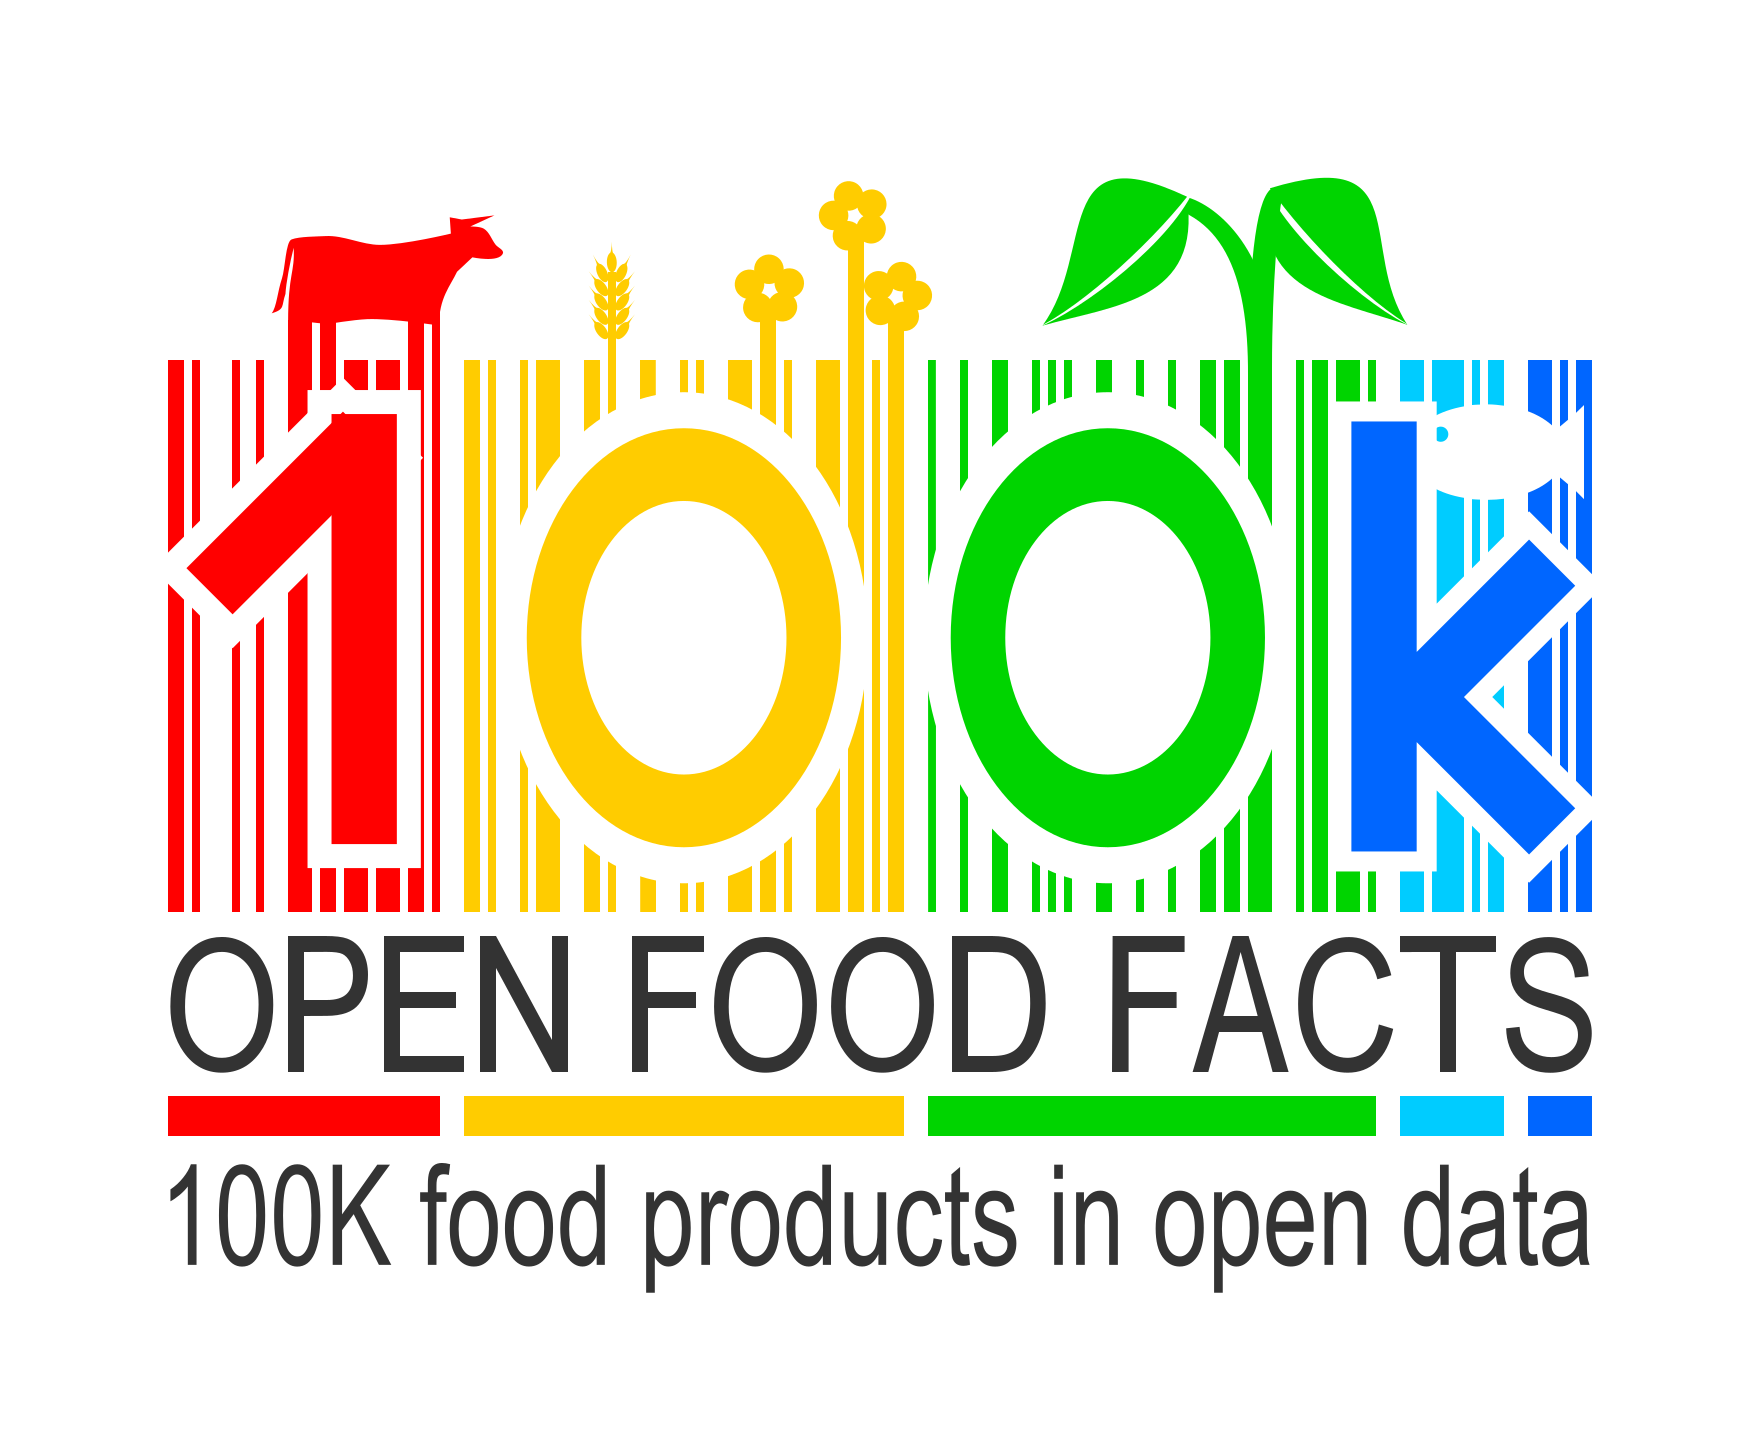 Open Food Facts - 100K food products in open data